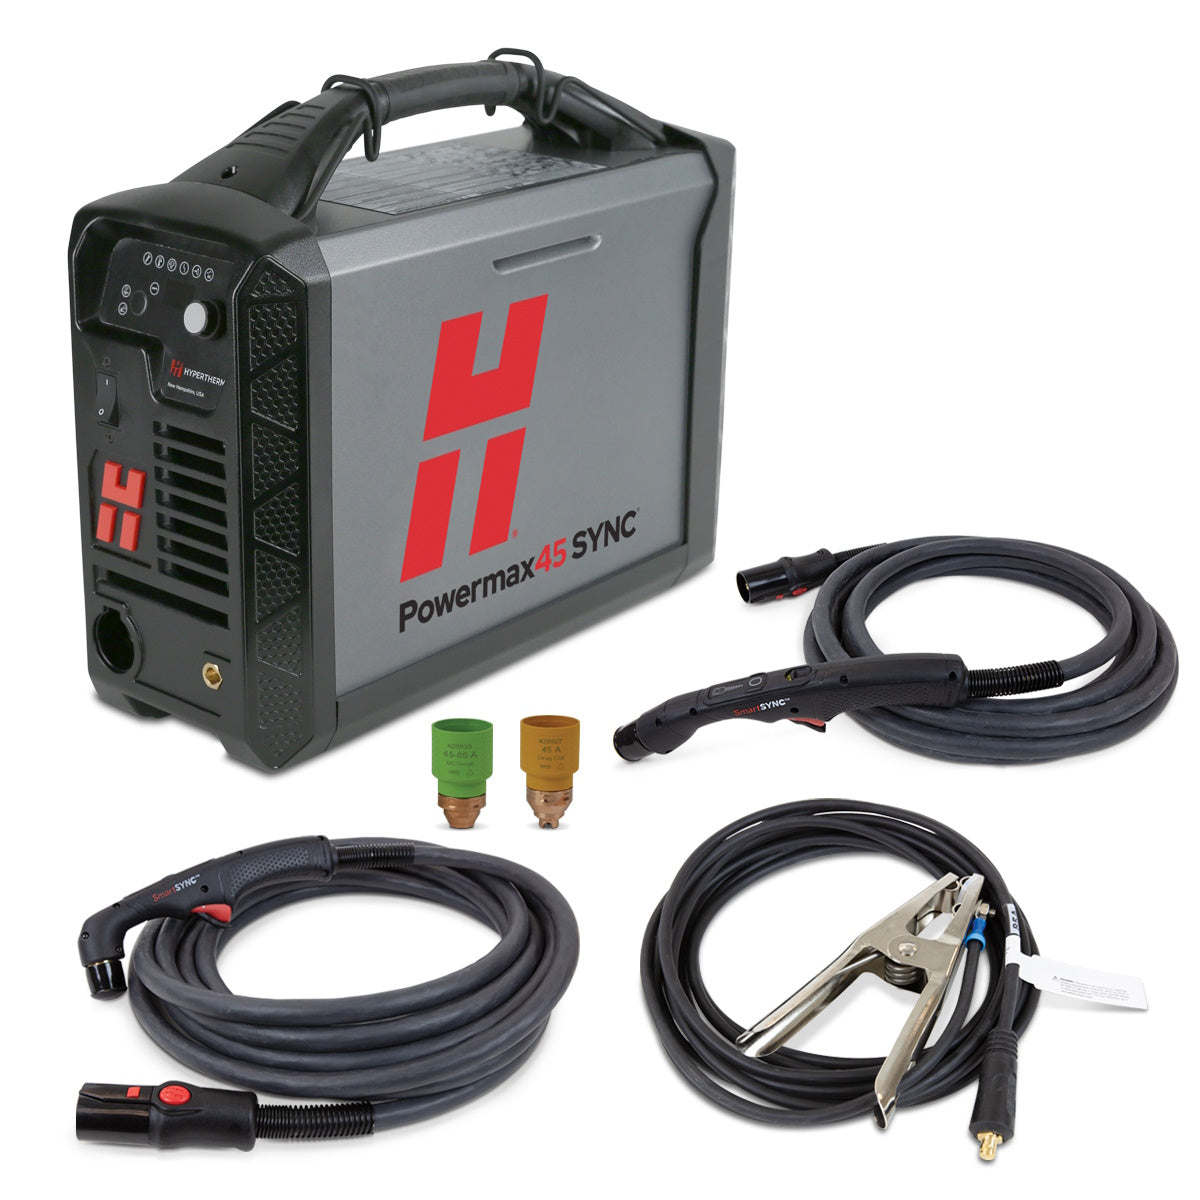 Hypertherm Powermax45 SYNC Plasma Cutter with 20ft 75° and 15° Hand Torches (088564)